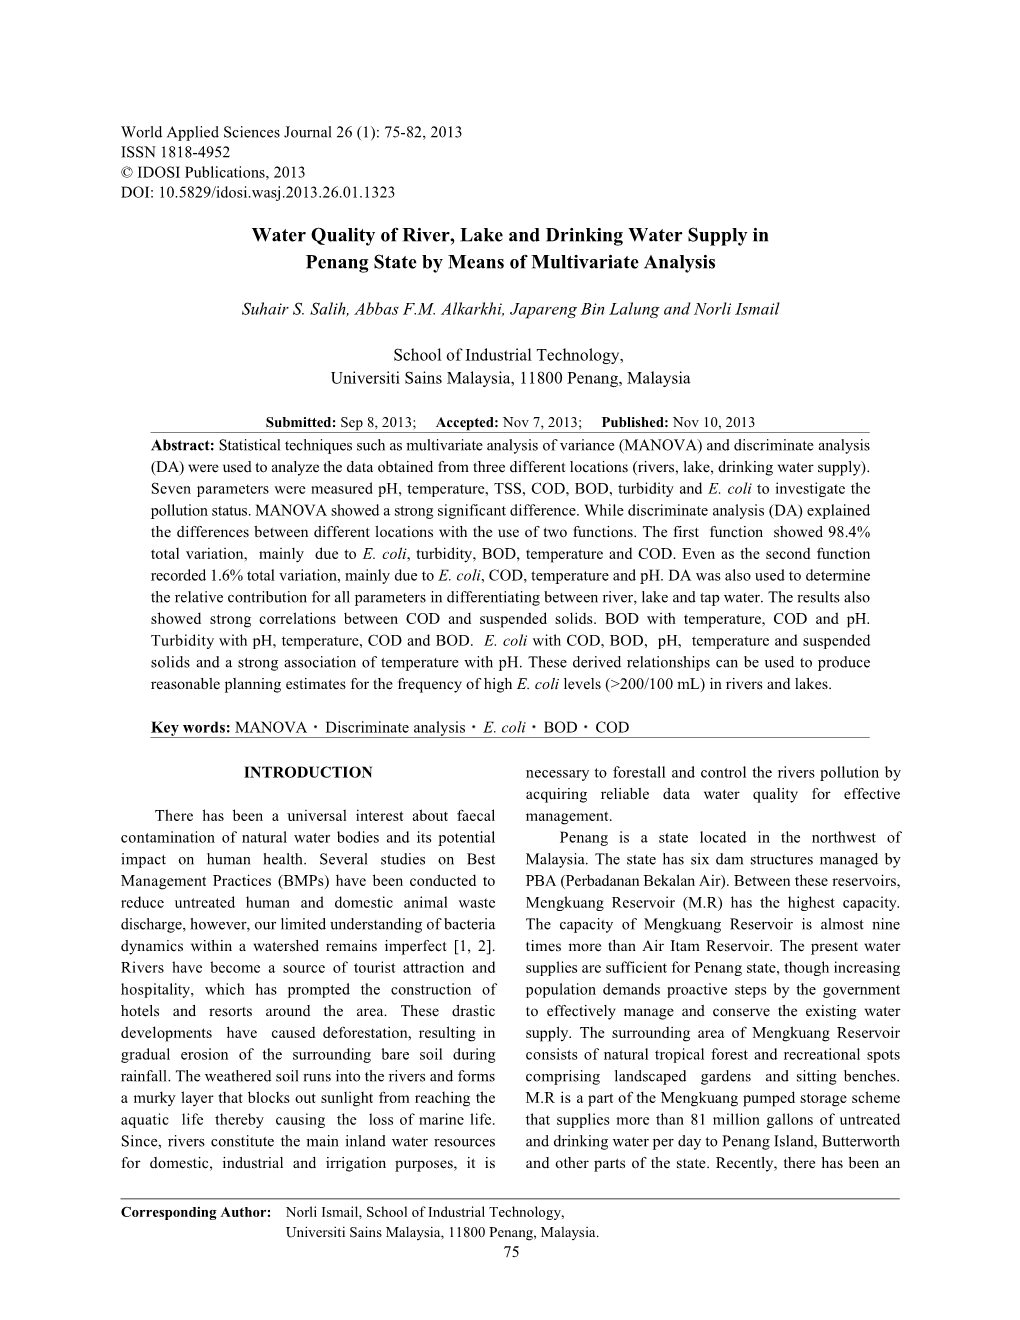 Water Quality of River, Lake and Drinking Water Supply in Penang State by Means of Multivariate Analysis